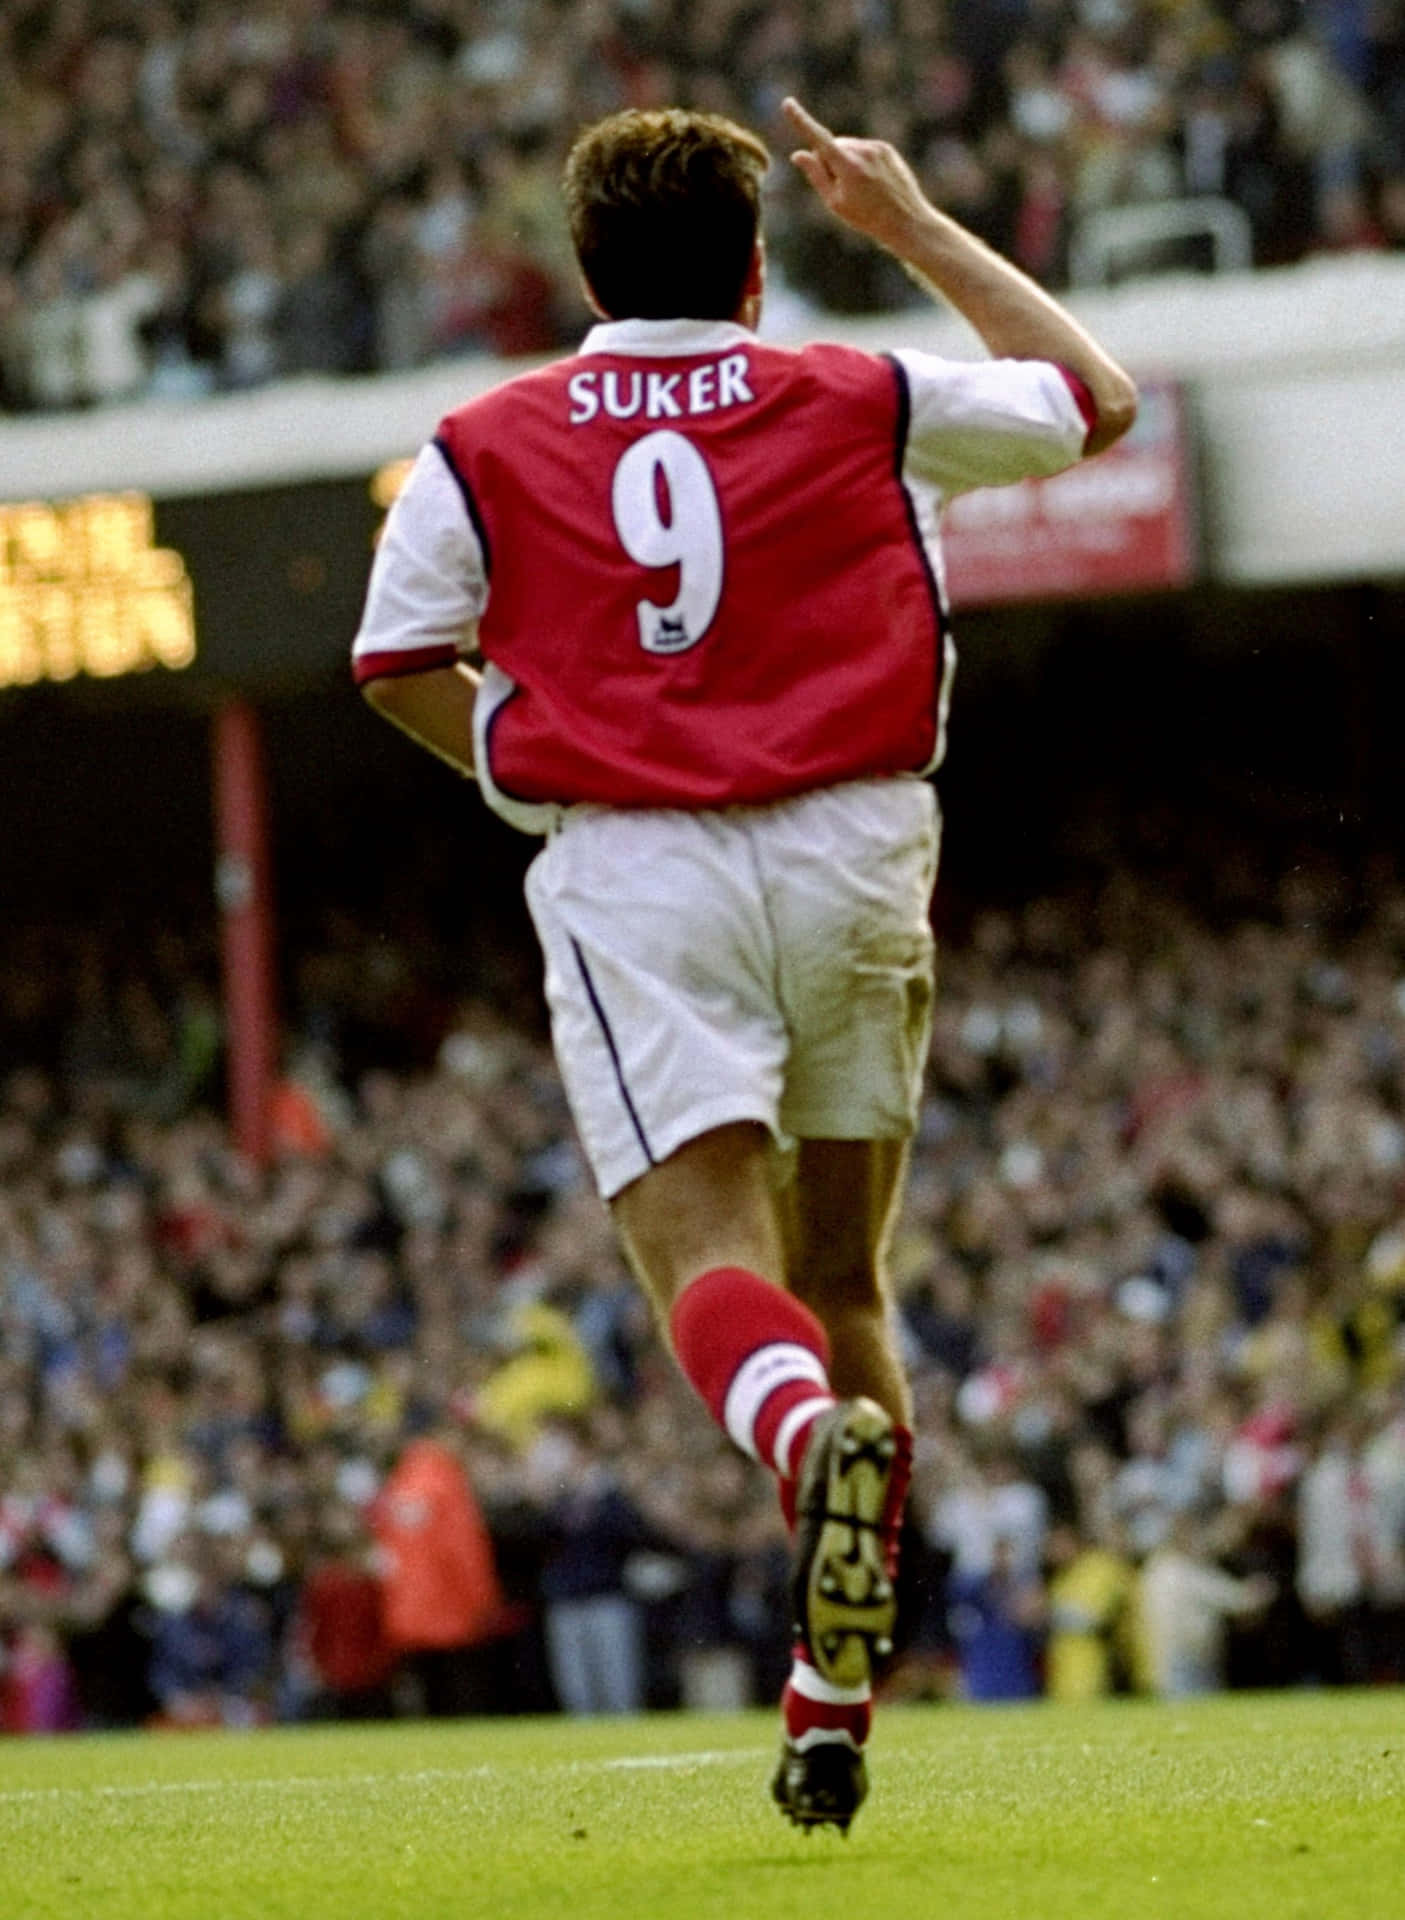 Davor Suker in action wearing his jersey with number 9. Wallpaper